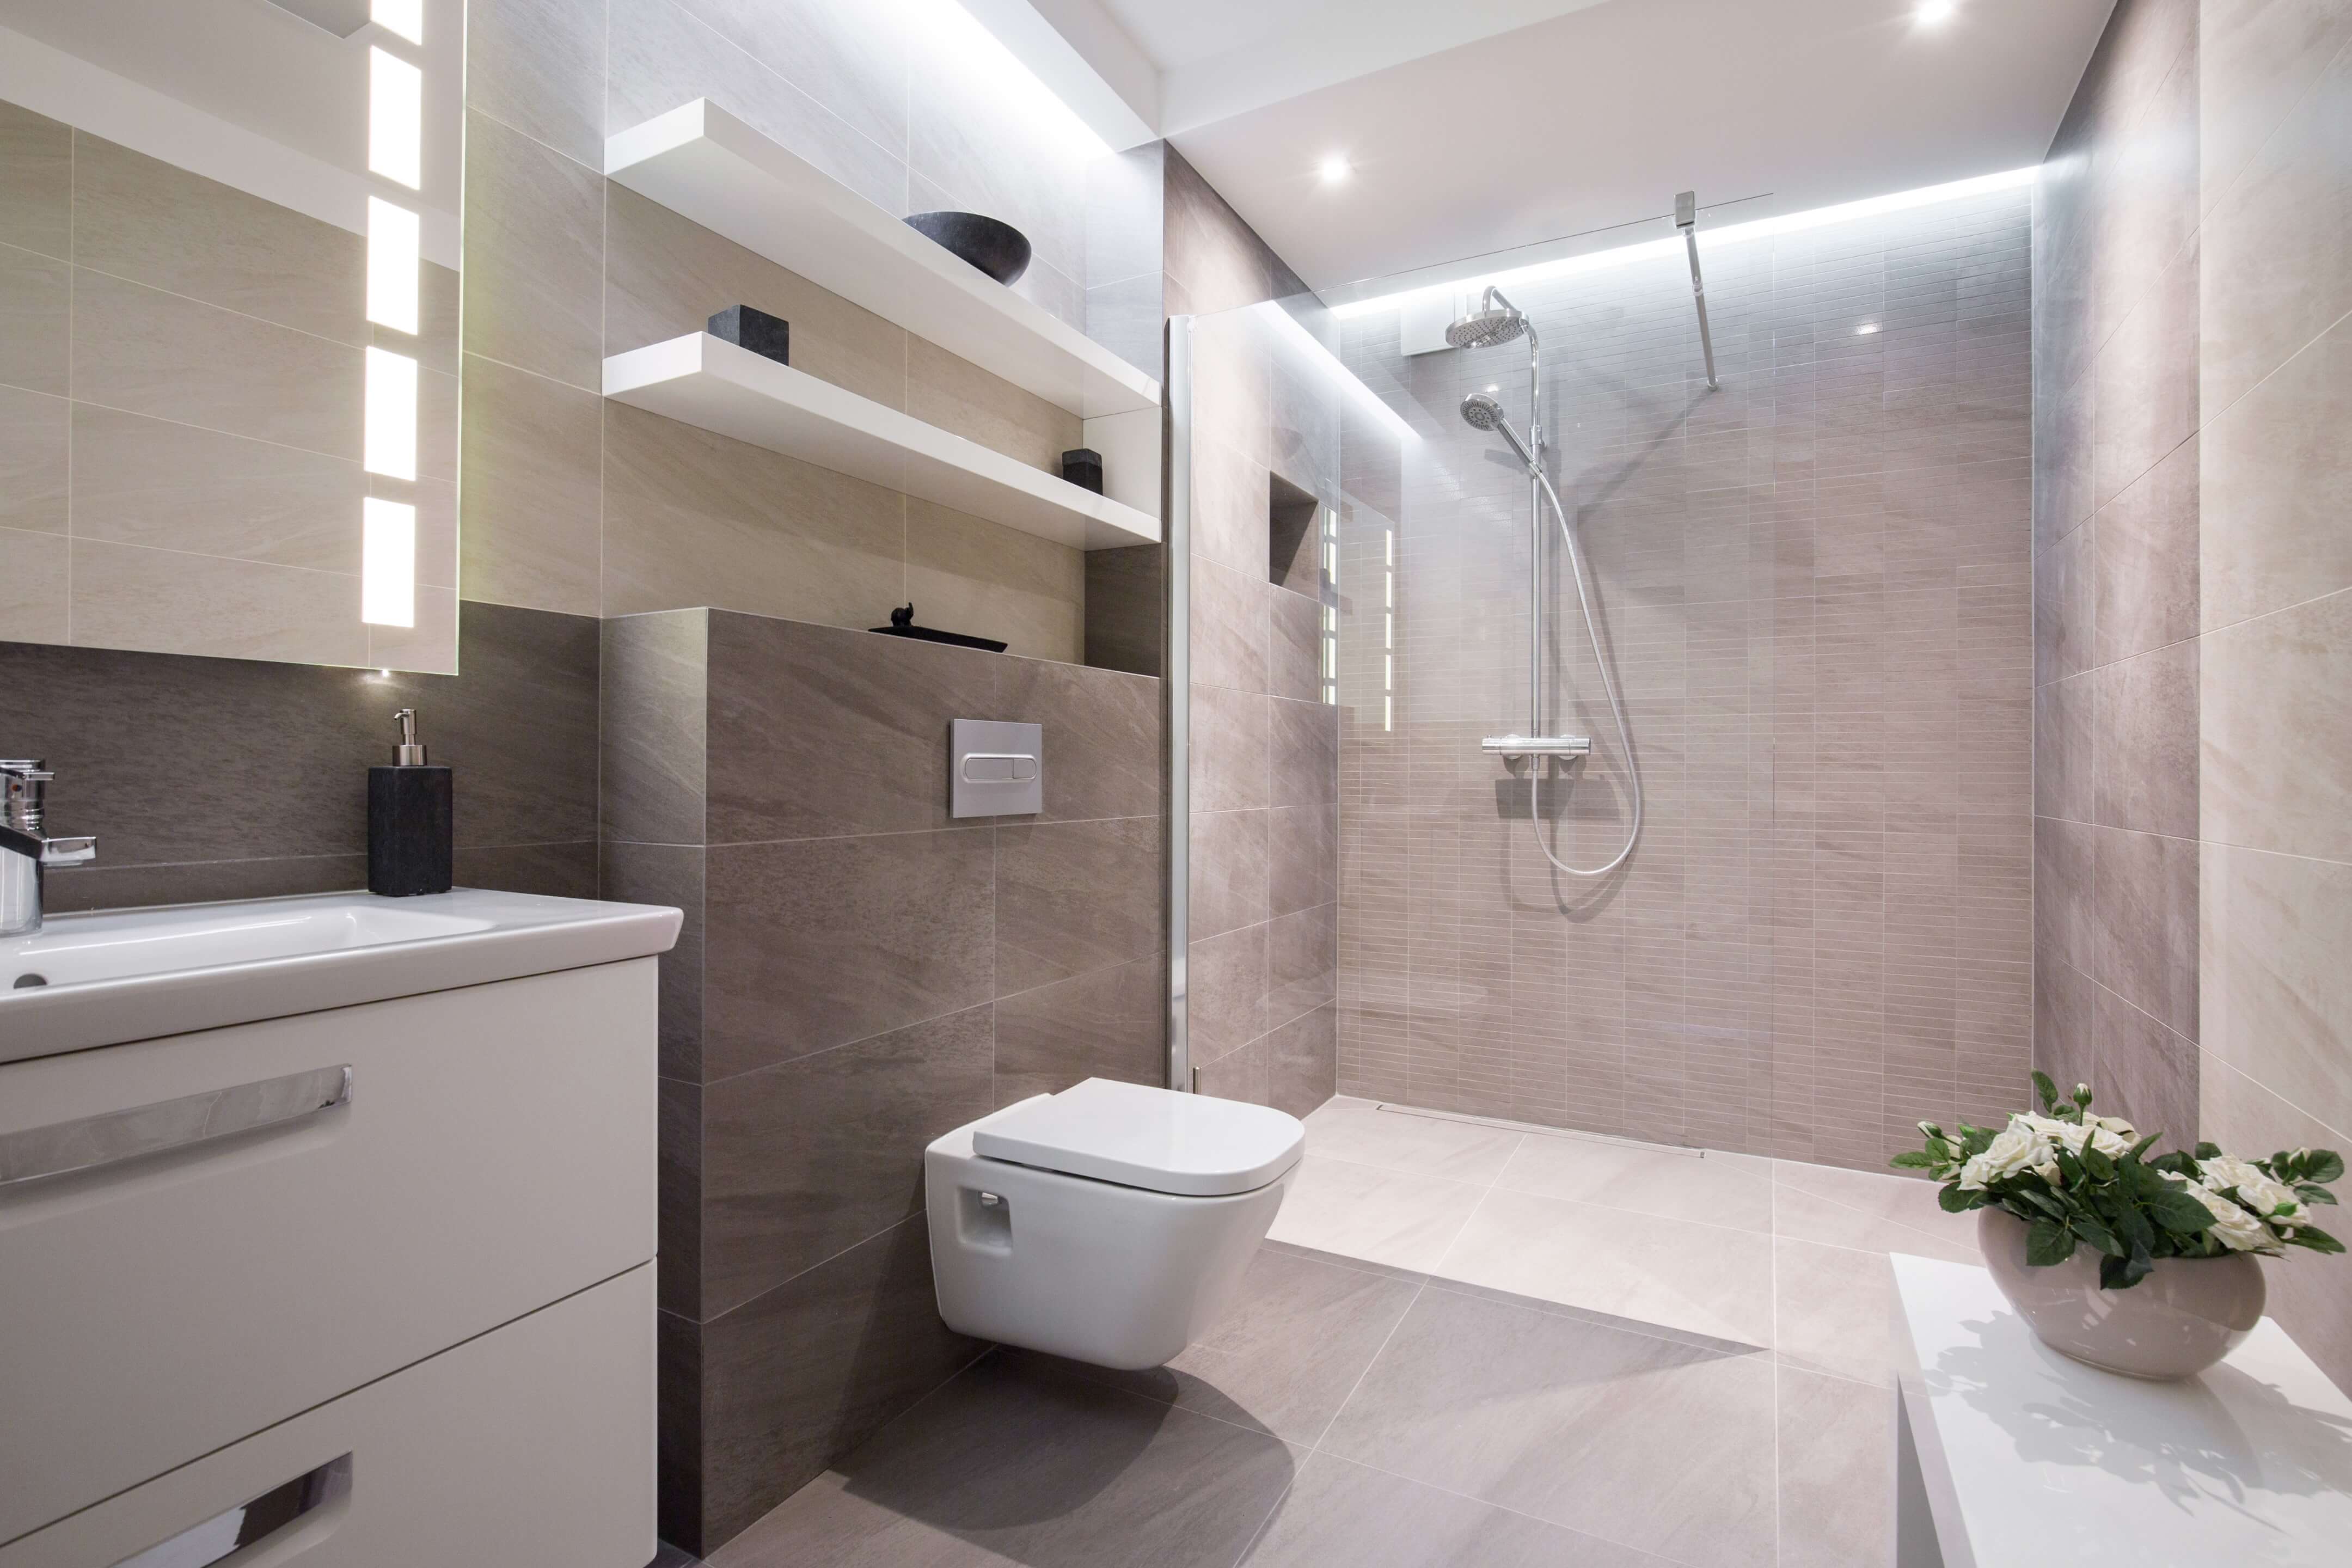 local bathroom fitters brixton